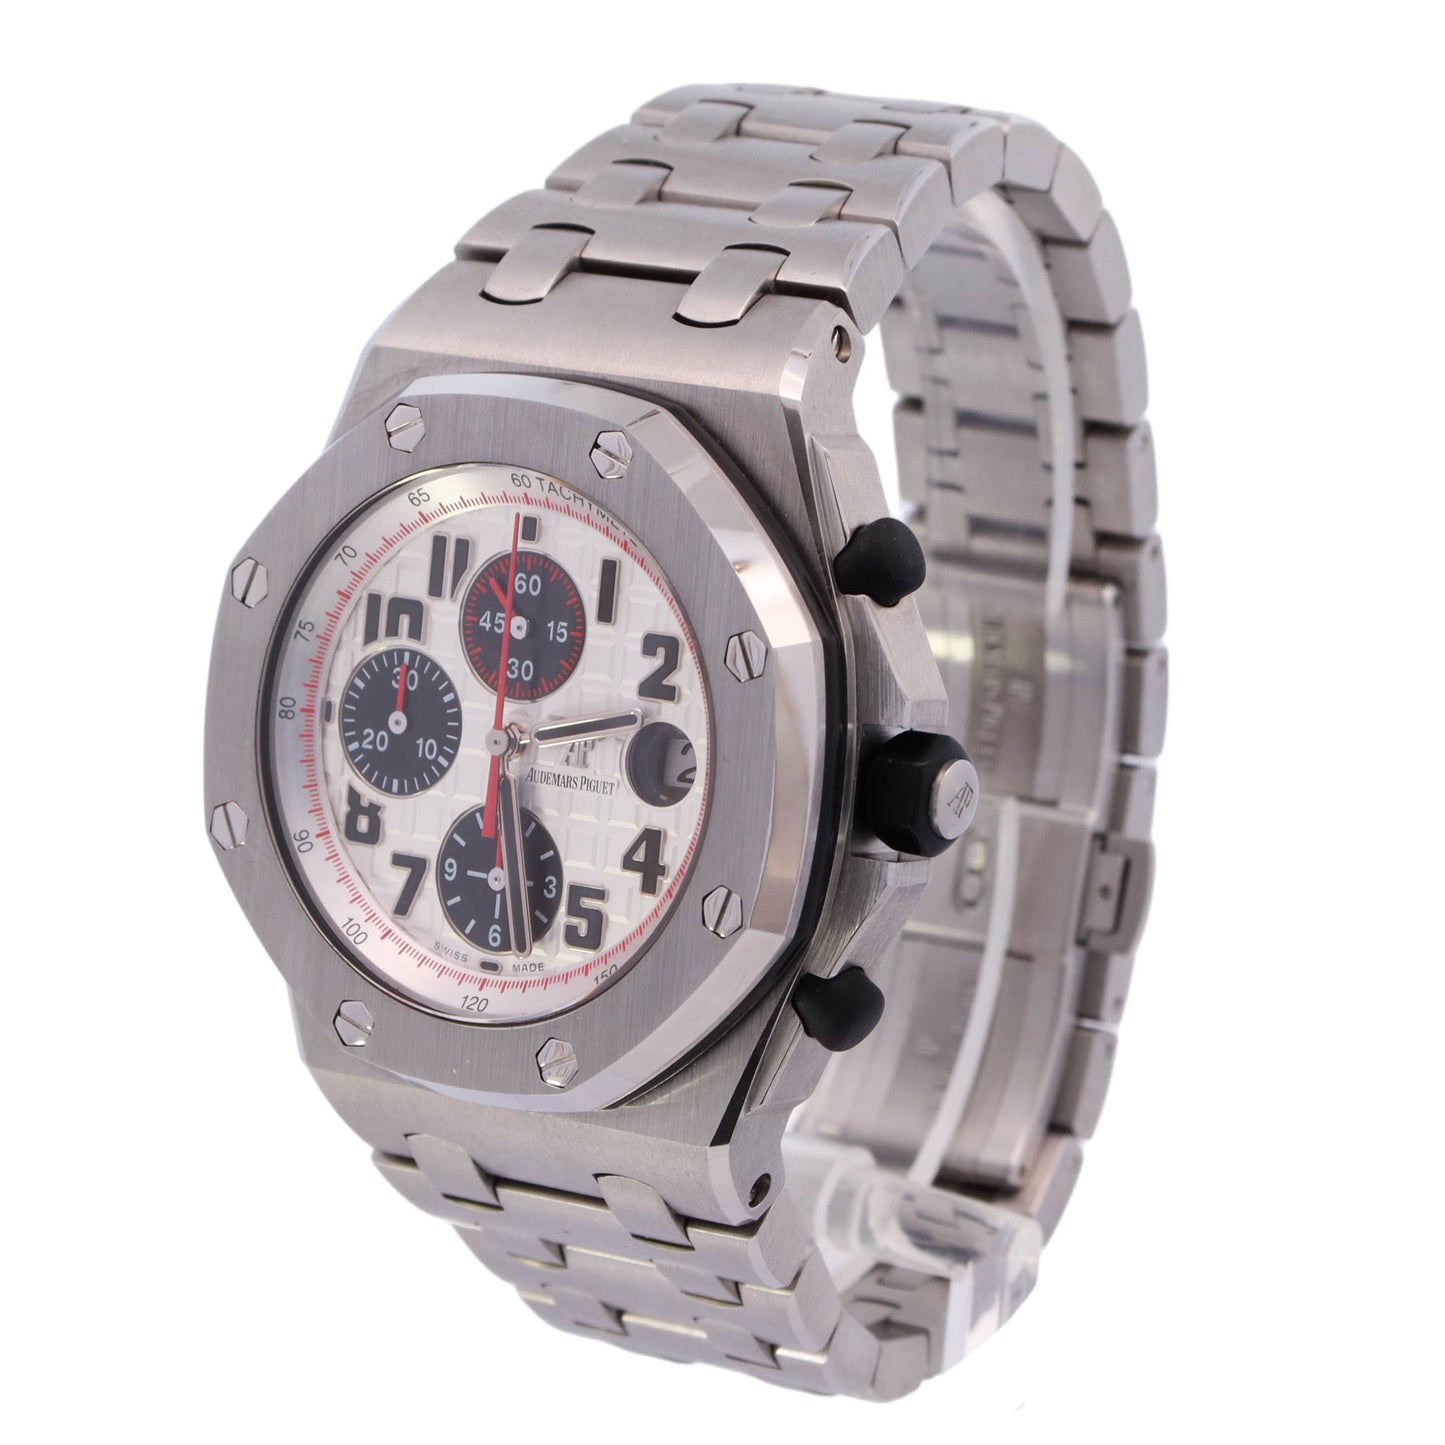 Audemars Piguet Royal Oak Offshore Stainless Steel 42mm White Chronograph Dial Watch Reference# 26170ST.OO.1000ST.01 - Happy Jewelers Fine Jewelry Lifetime Warranty